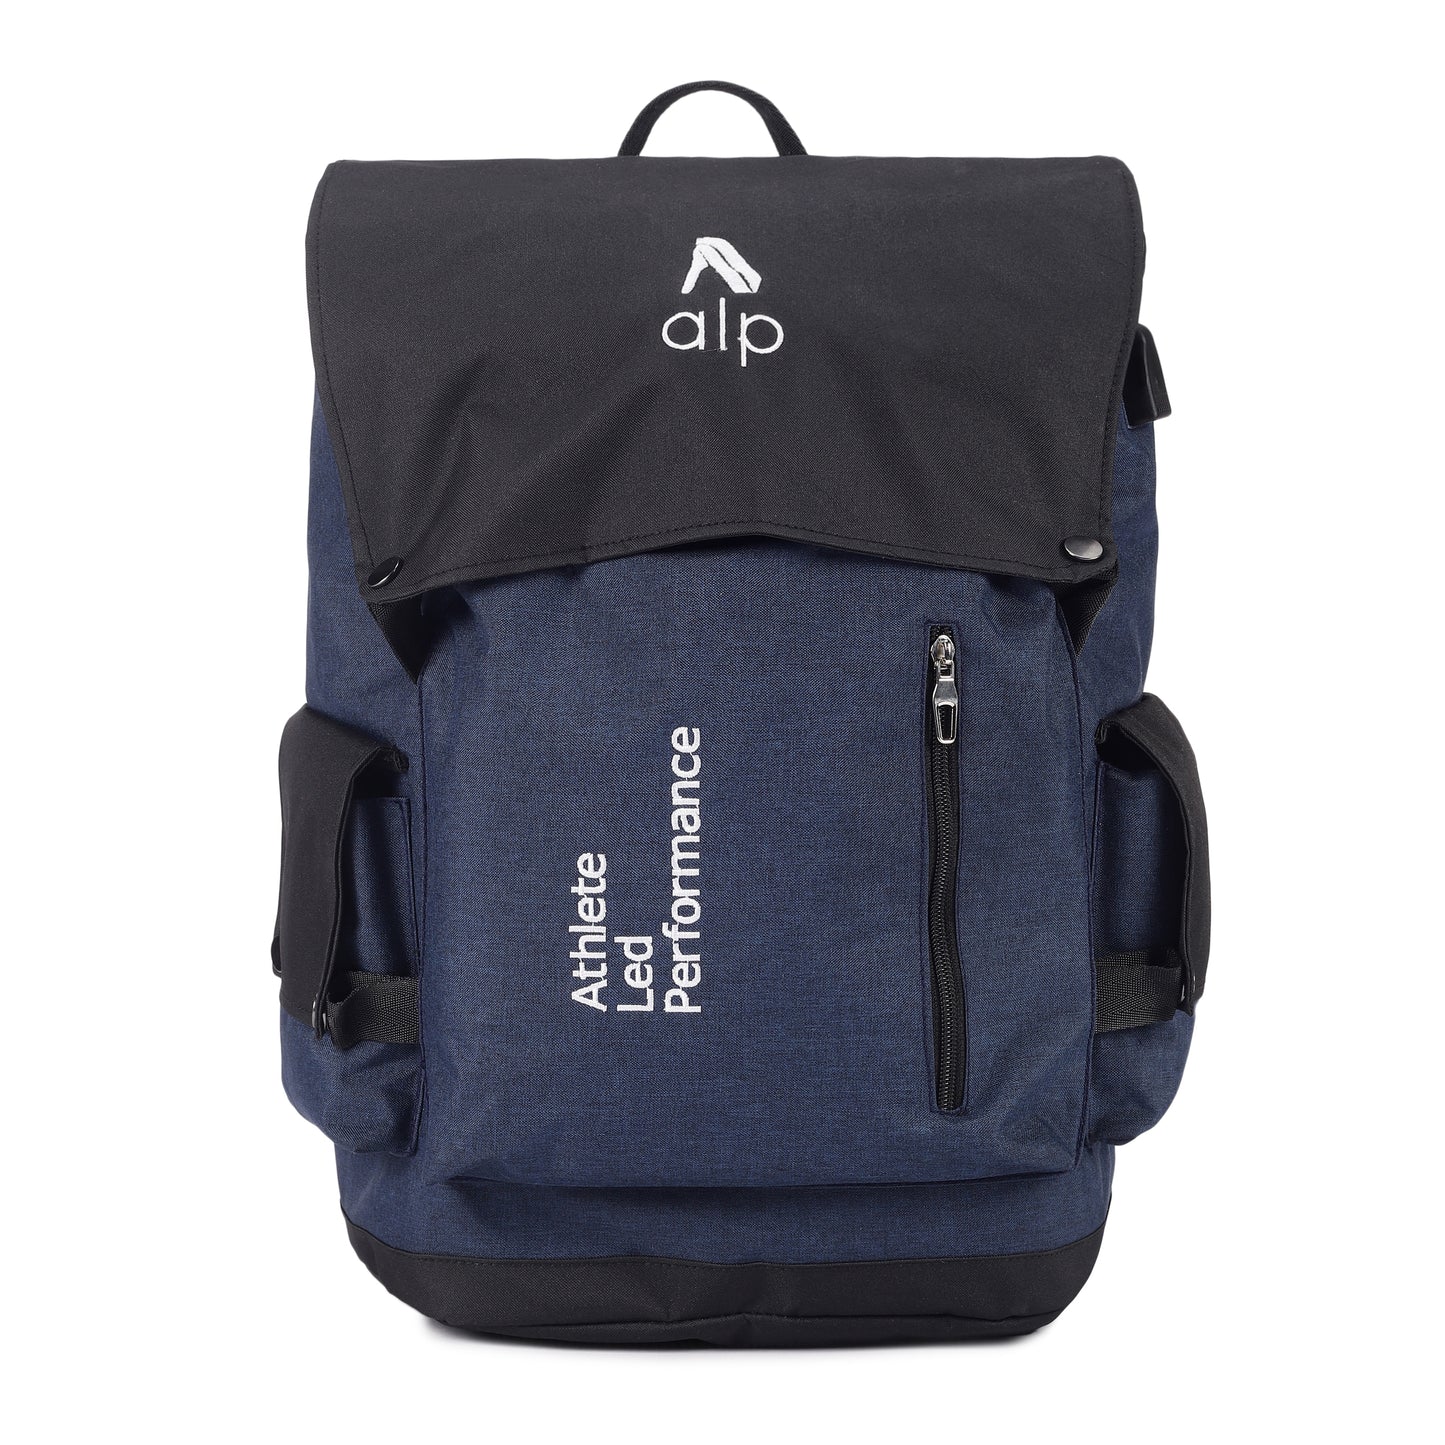 Buy Traverse Backpack Online for Travel & Outdoor - Navy Blue